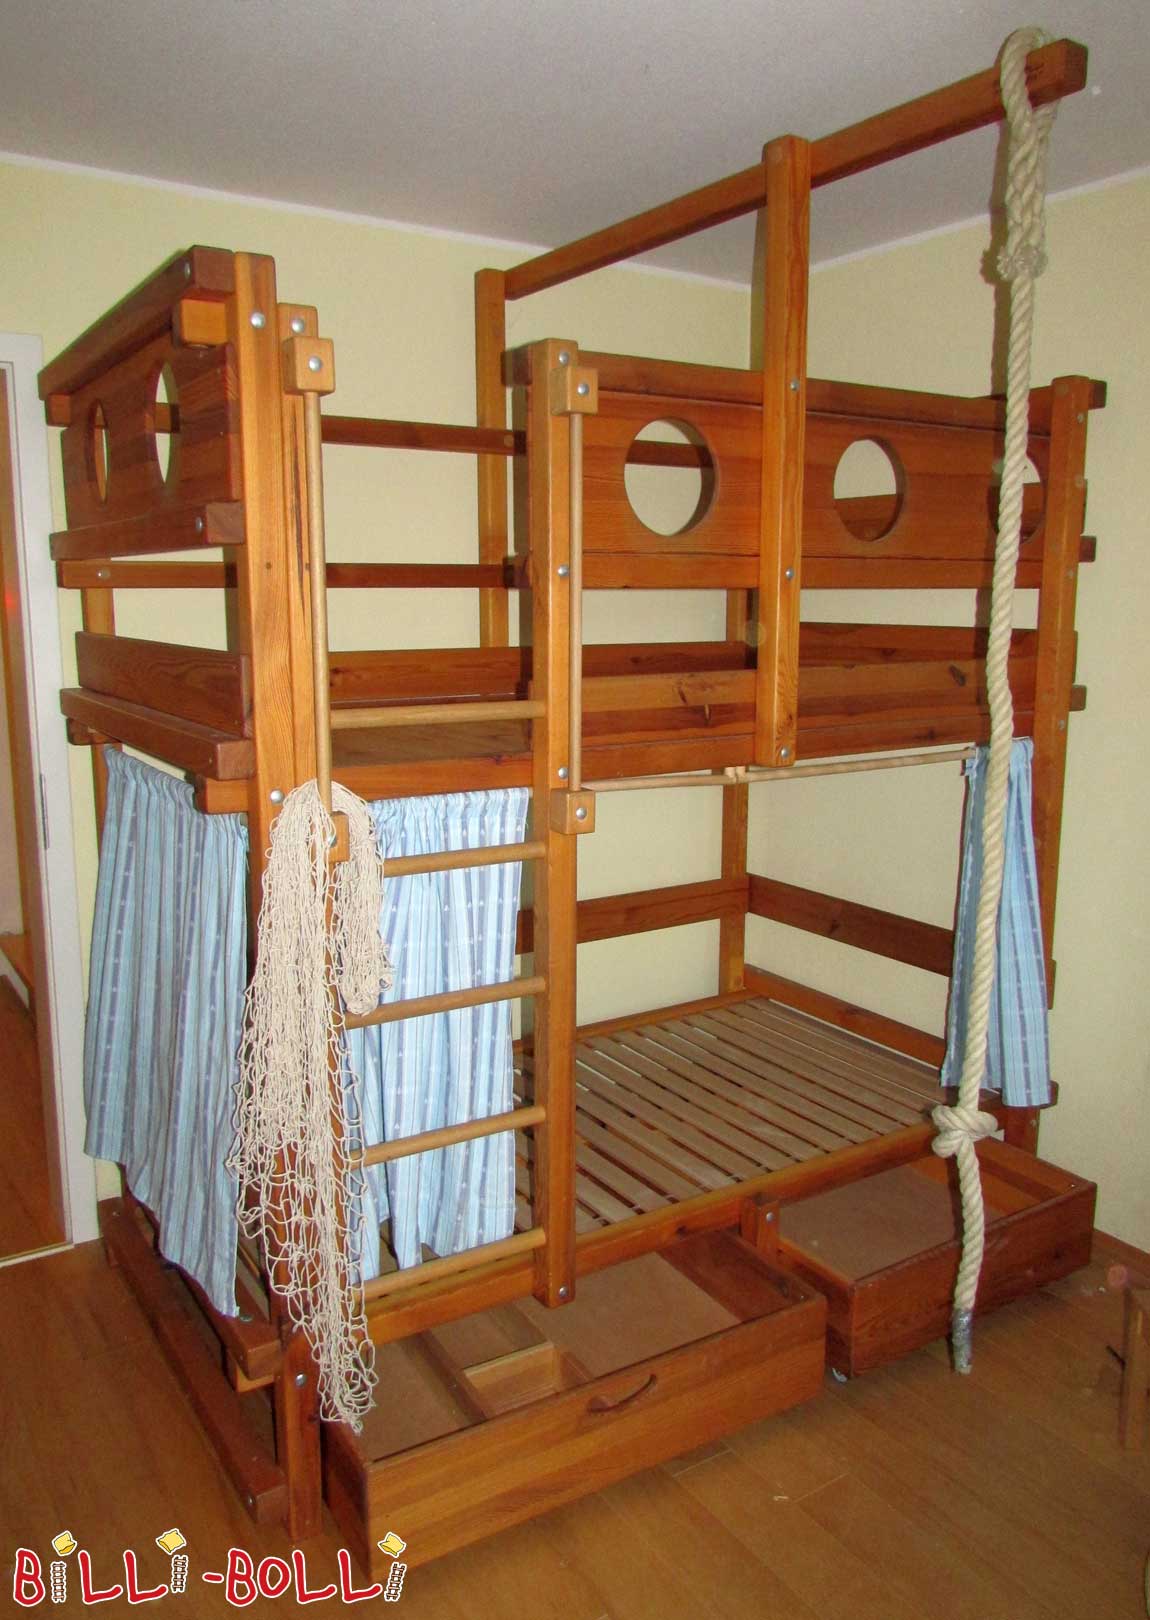 Loft bed growing with the child, 100 x 195 cm, oiled-waxed pine (Category: second hand loft bed)